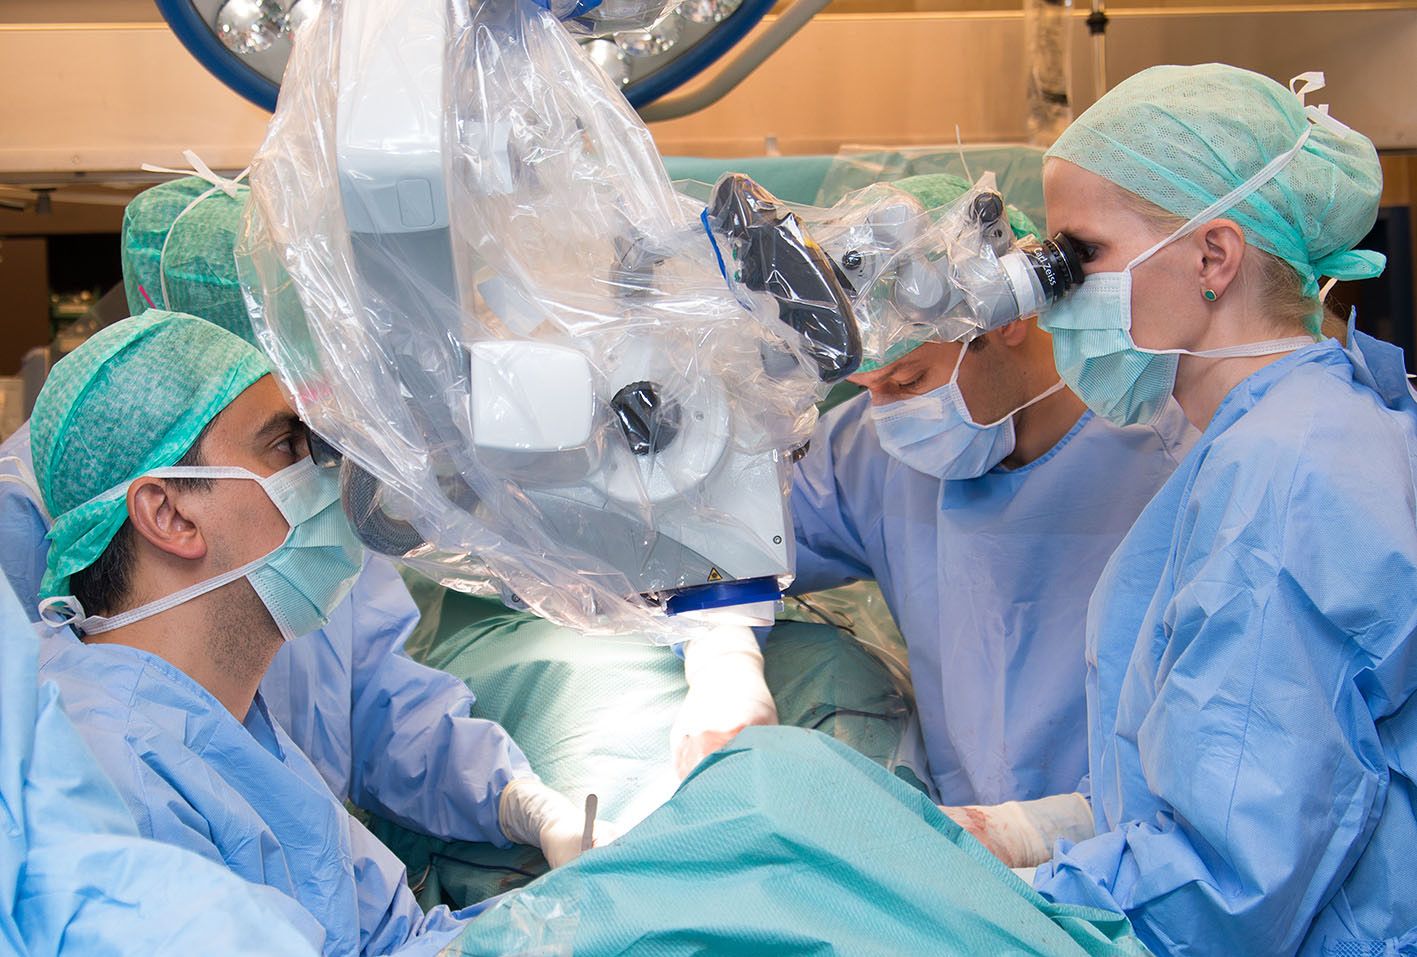 Three surgeons and one female surgeon perform a breast operation